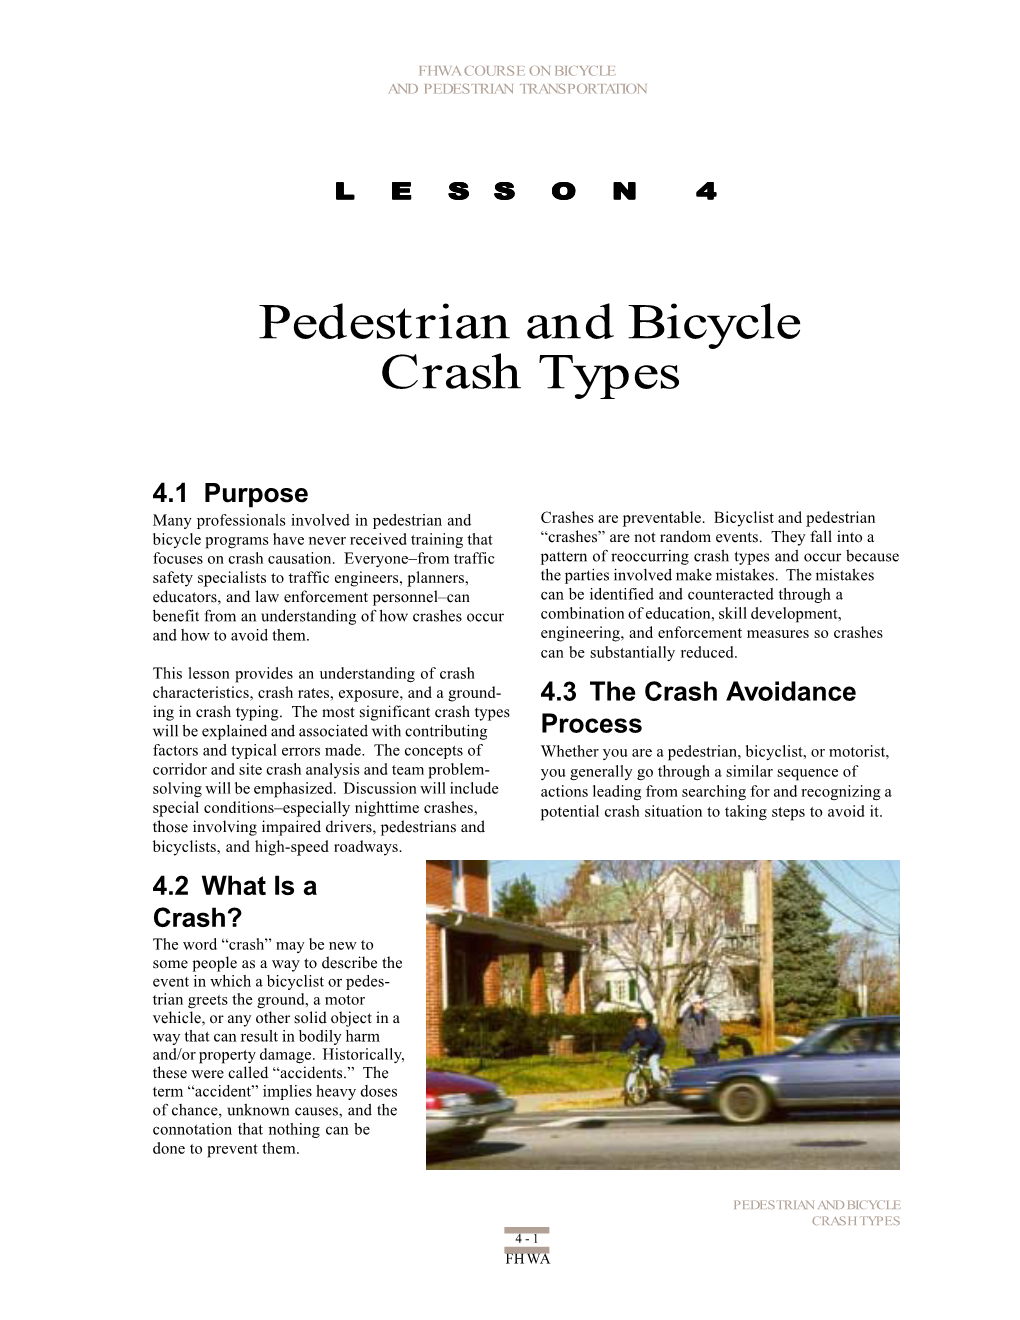 Pedestrian and Bicycle Crash Types